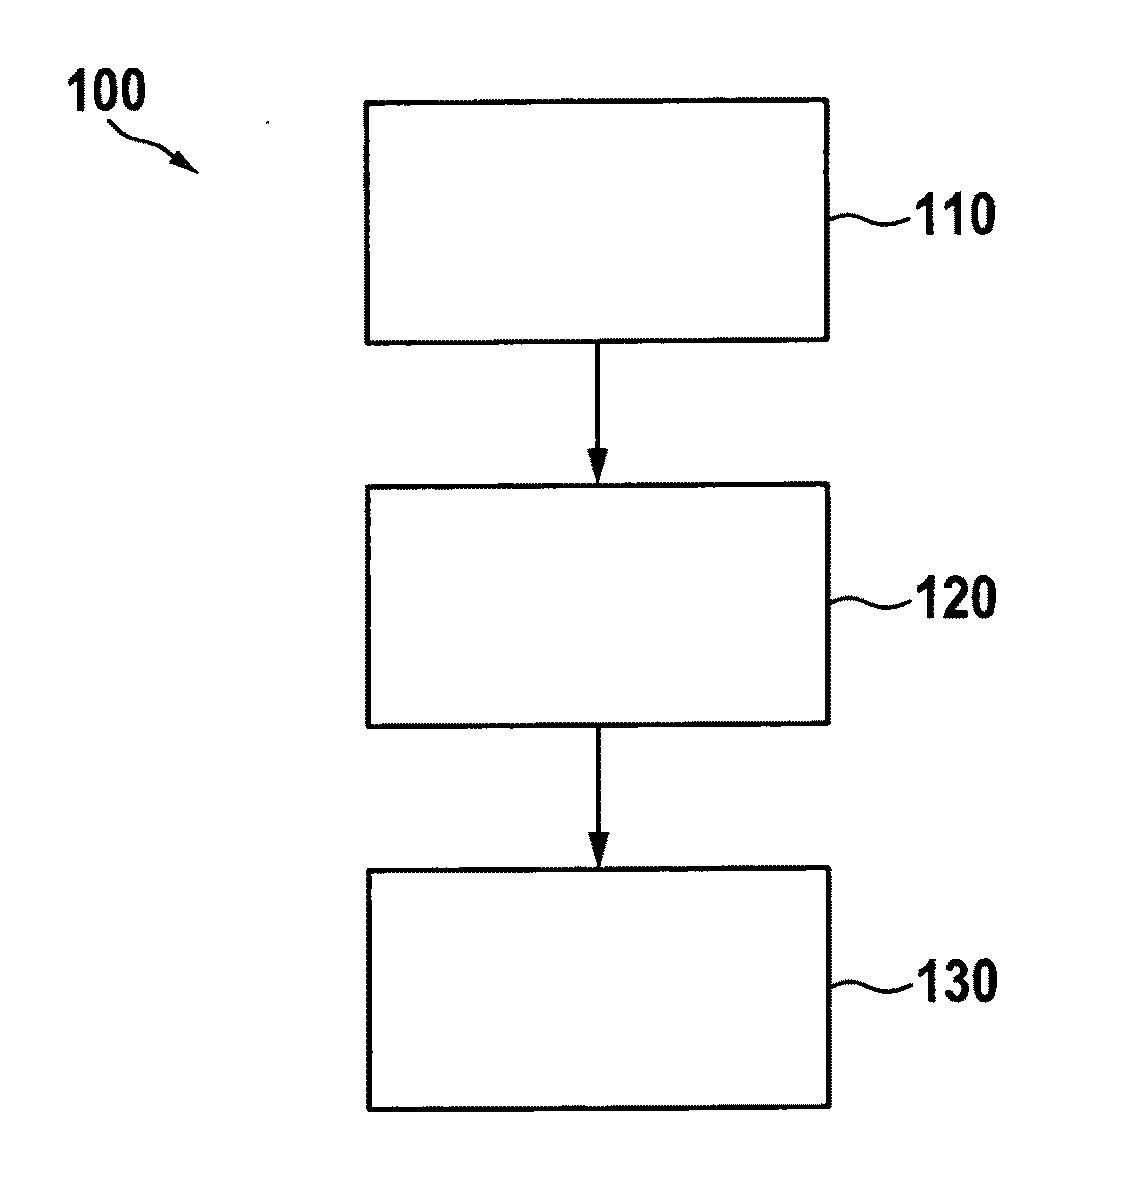 Method and device for detecting an interfering object in a camera image